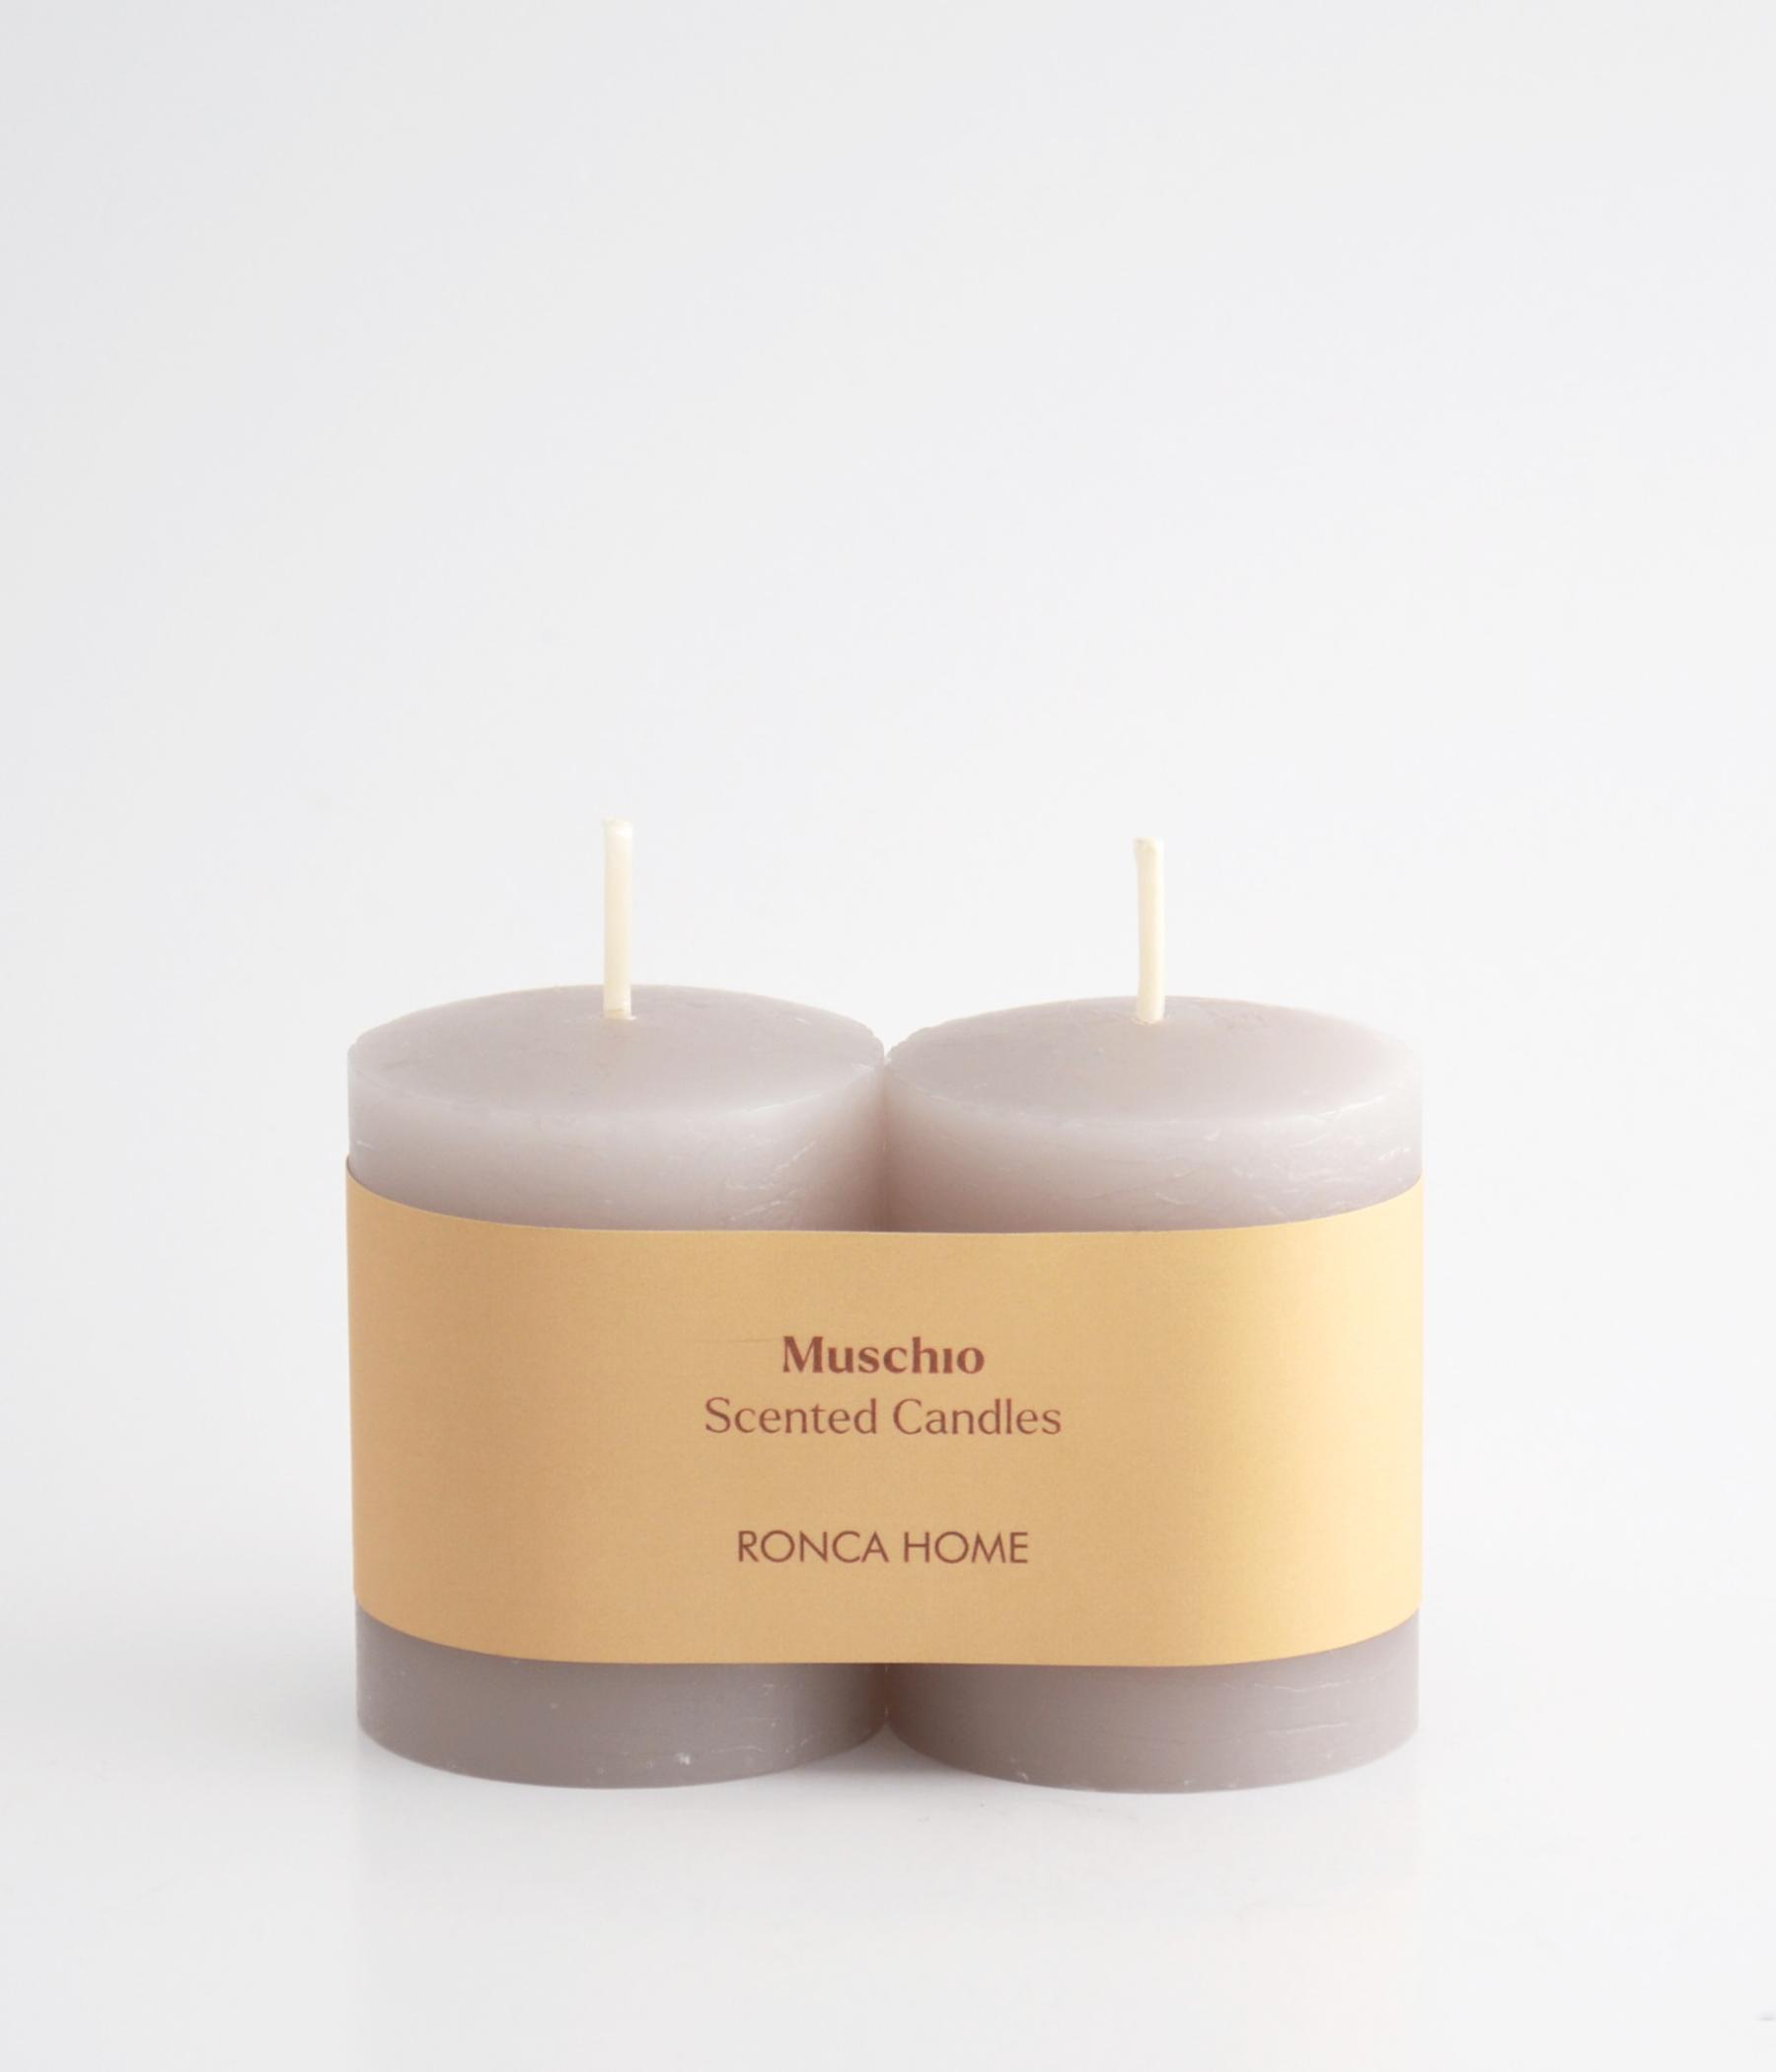 Little candle / Musk - Ronca Home